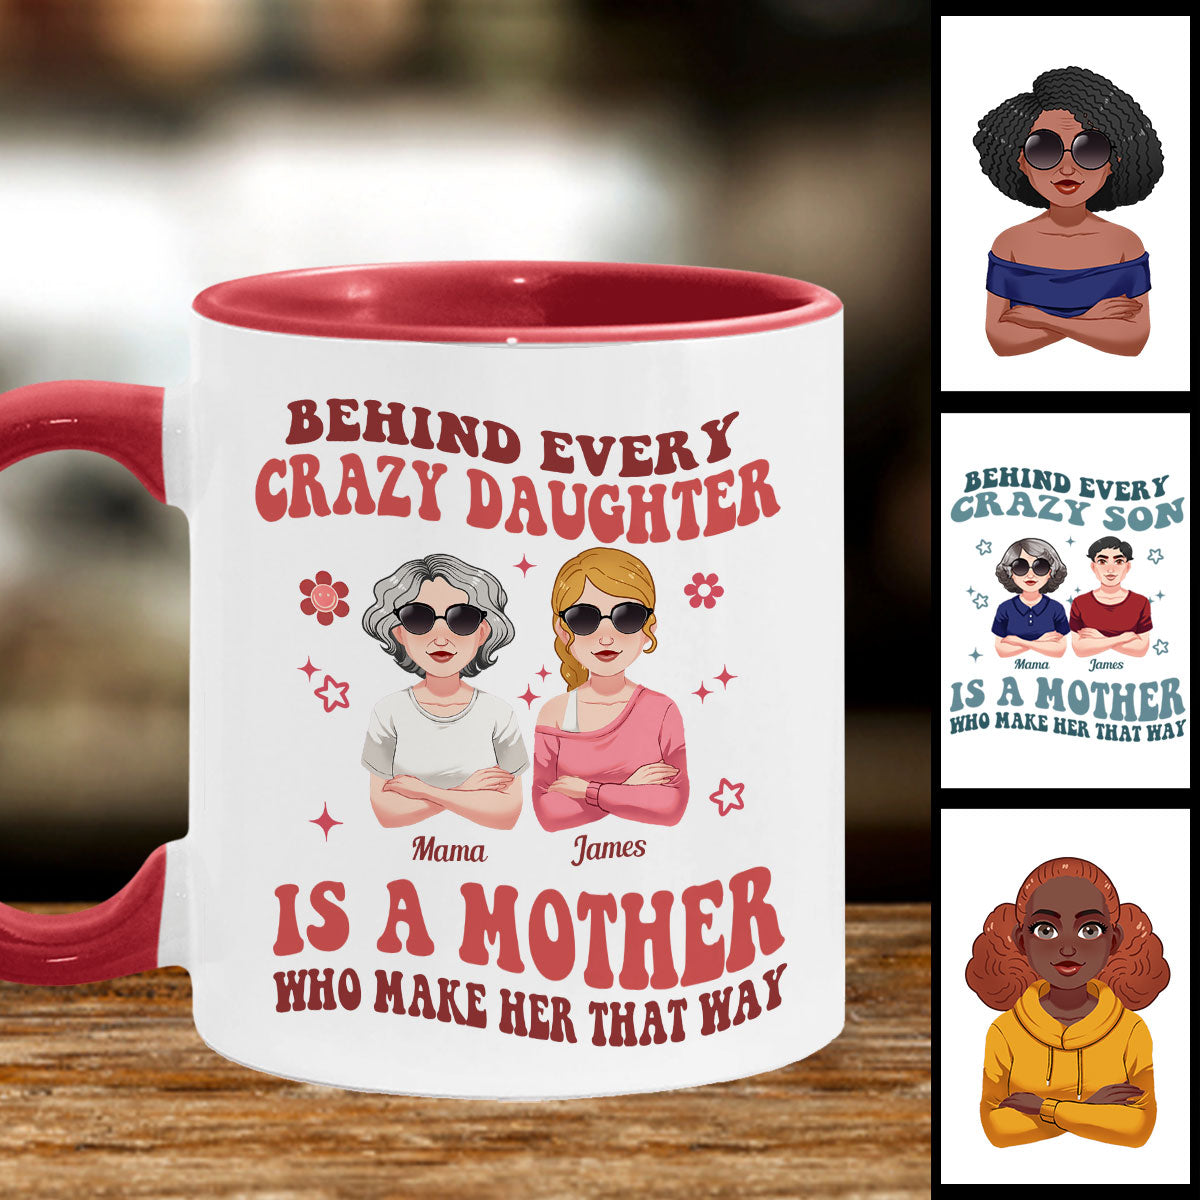 Discover Behind Every Crazy Daughter/Son - Personalized Mother Accent Mug